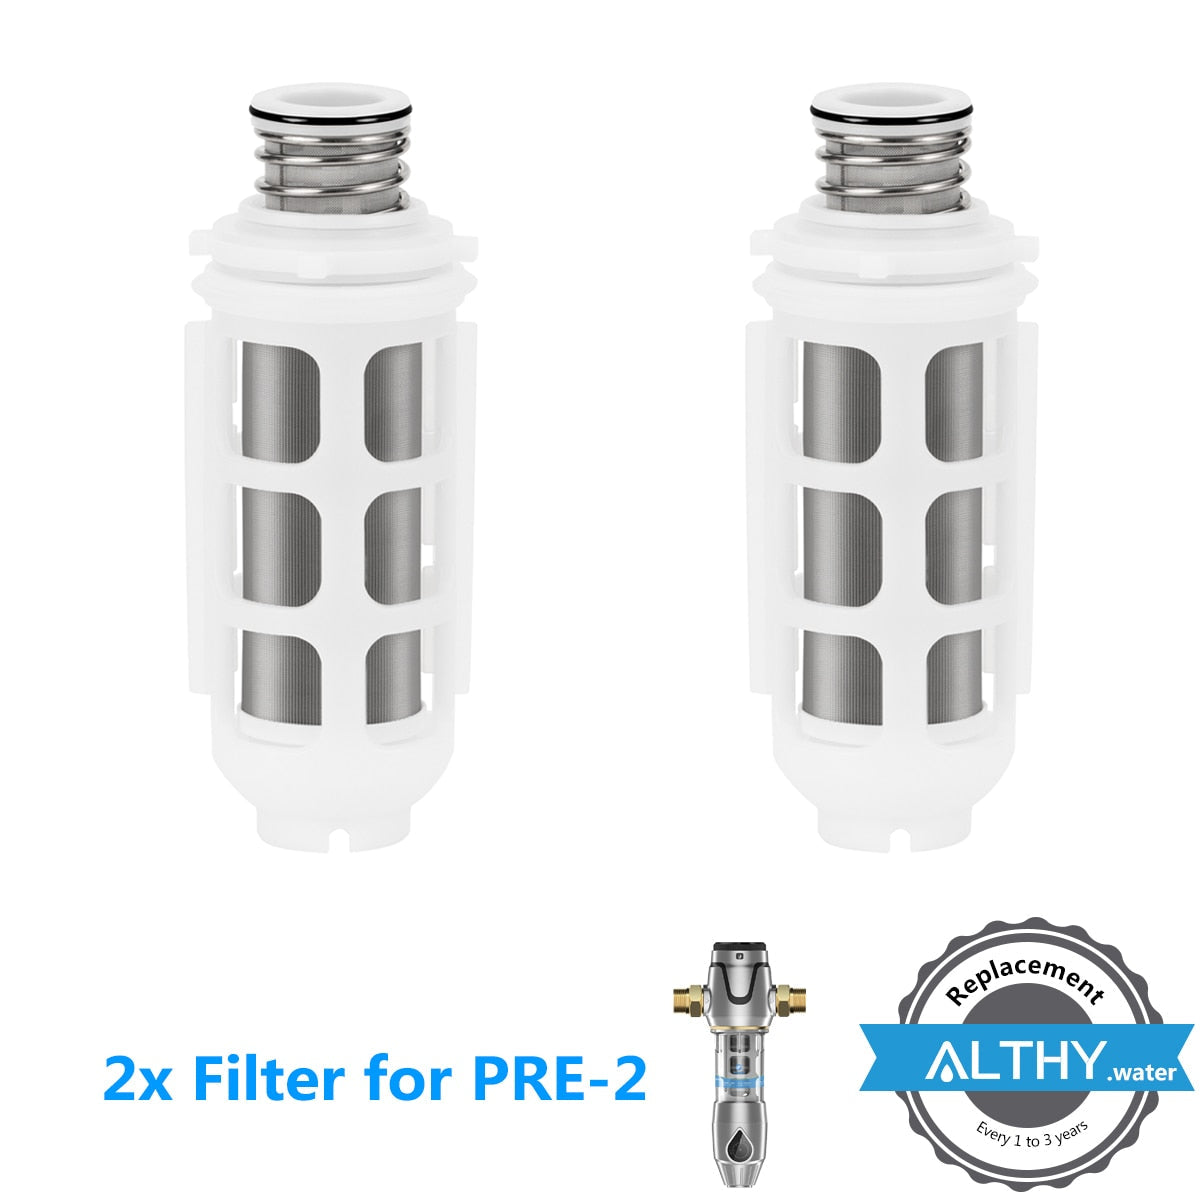 Backwash Water Filter Replacement For ALTHY PRE1 / PRE2 / PRE3 / PRE4 / AUTO2 Central Prefilter System Stainless Steel Mesh  Hardware > Plumbing > Water Dispensing & Filtration 95.99 EZYSELLA SHOP